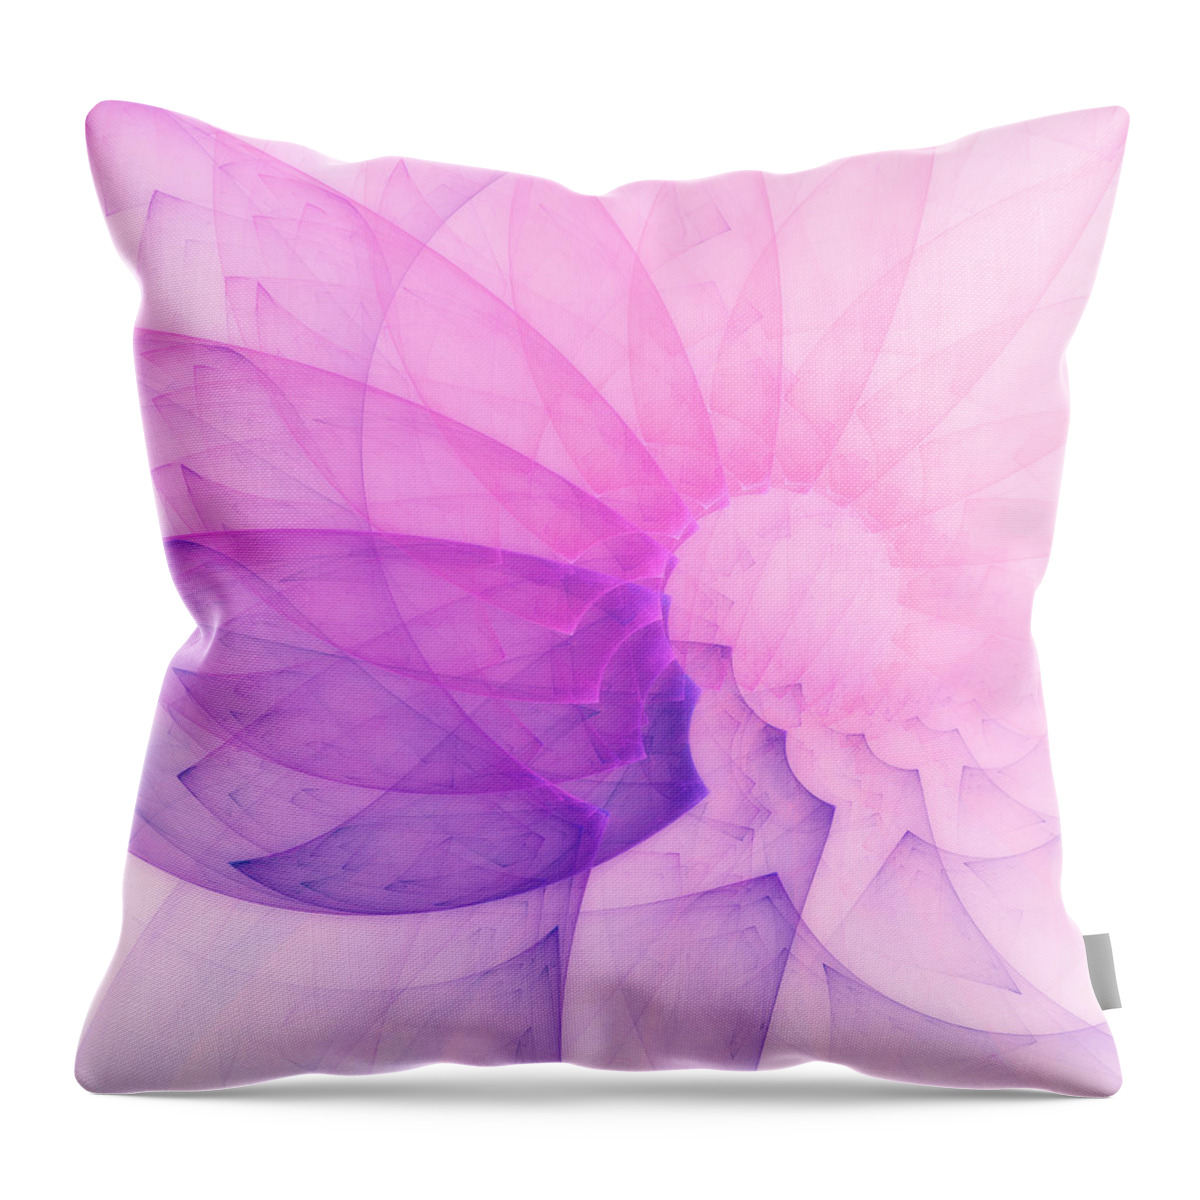 Art Throw Pillow featuring the digital art In Any Tongue by Jeff Iverson